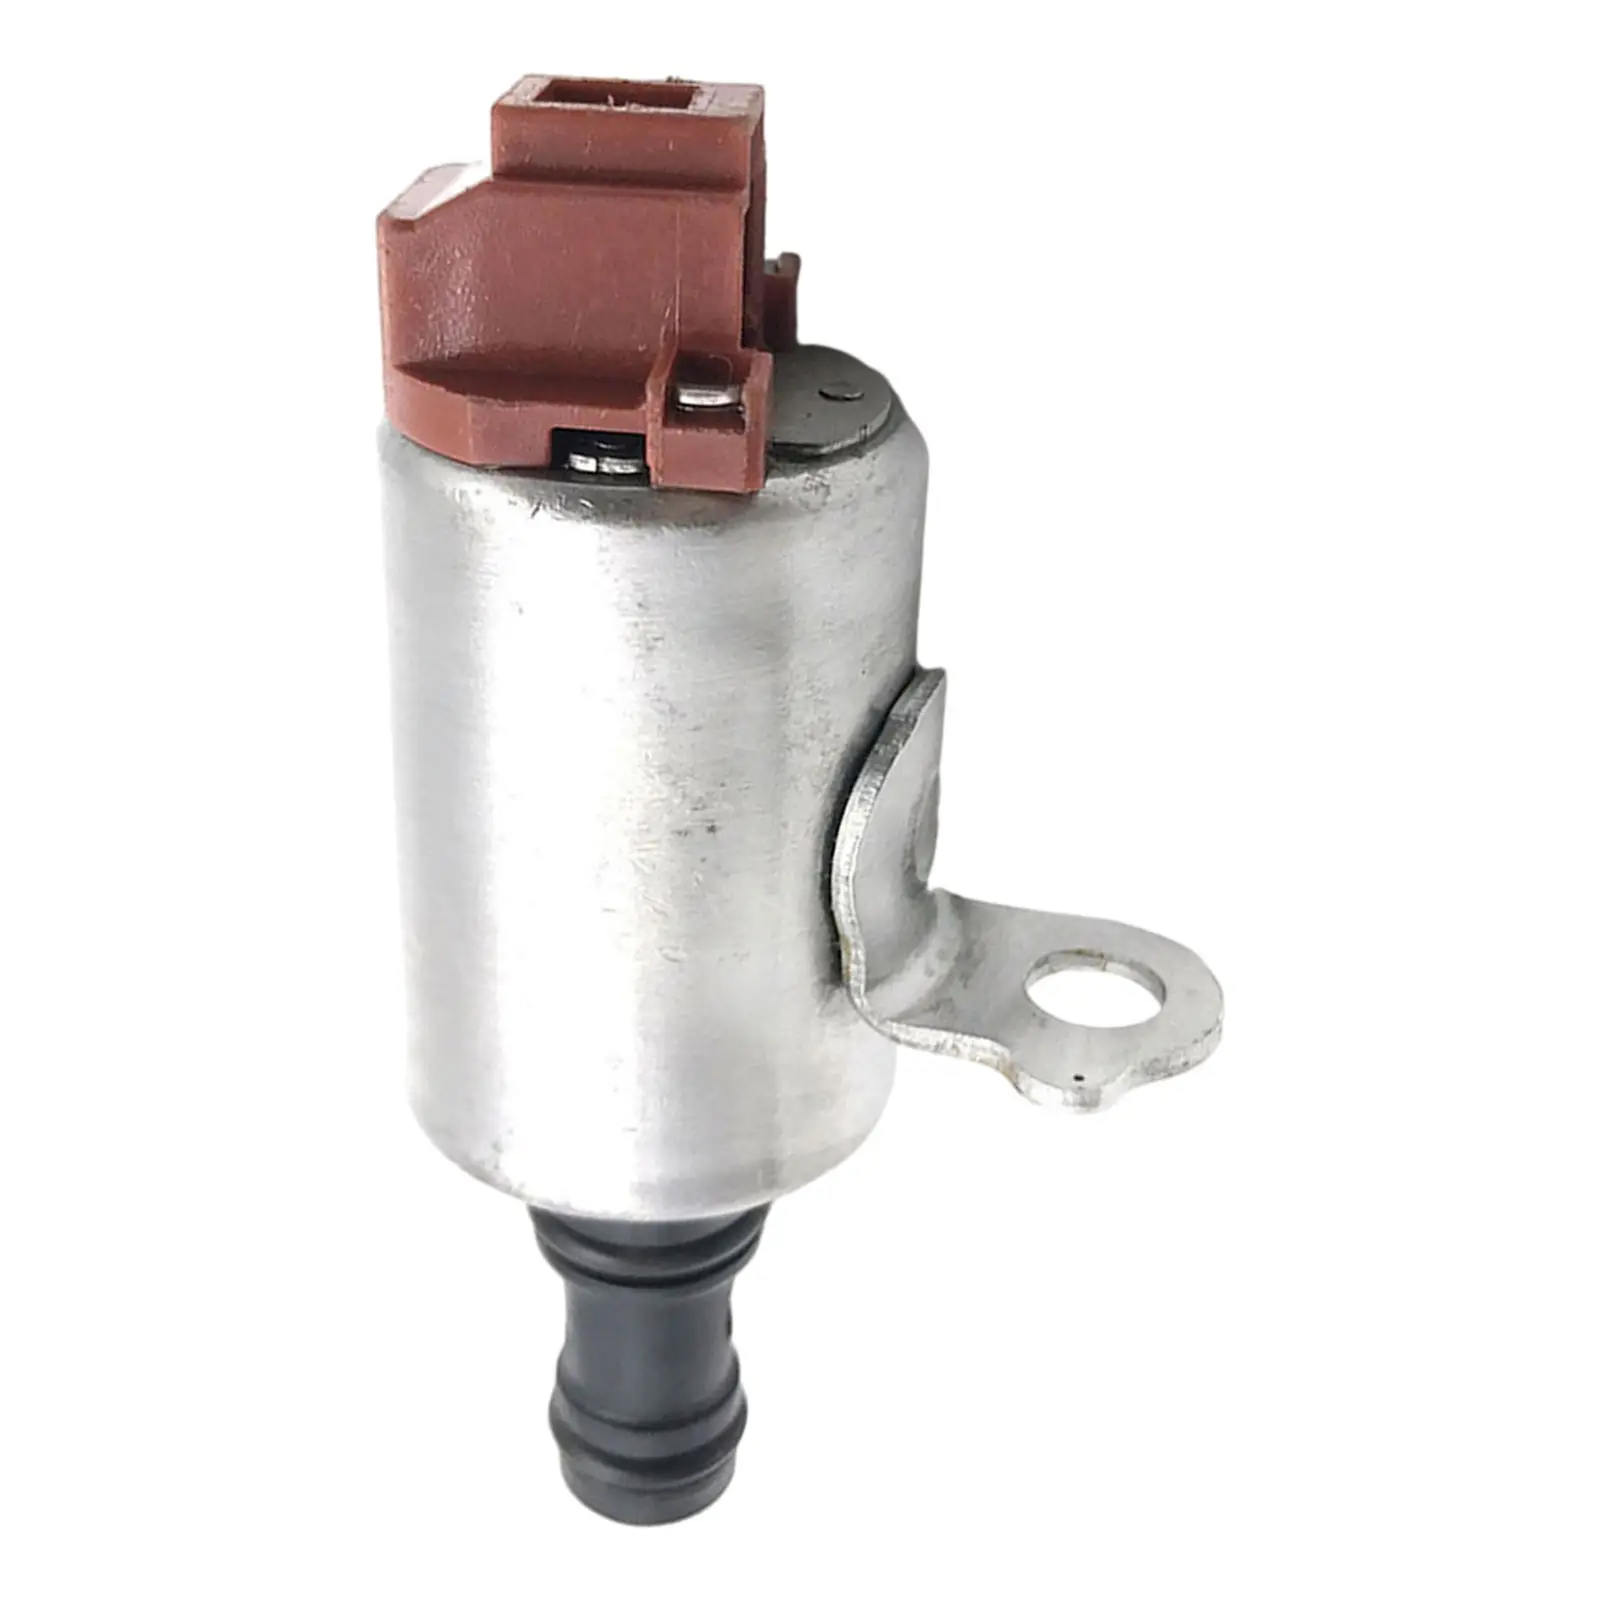 28400-PRP-004 Transmission Solenoid Valve Replacement for Accord, for , 2002-15, Auto Parts, 90430A 98957